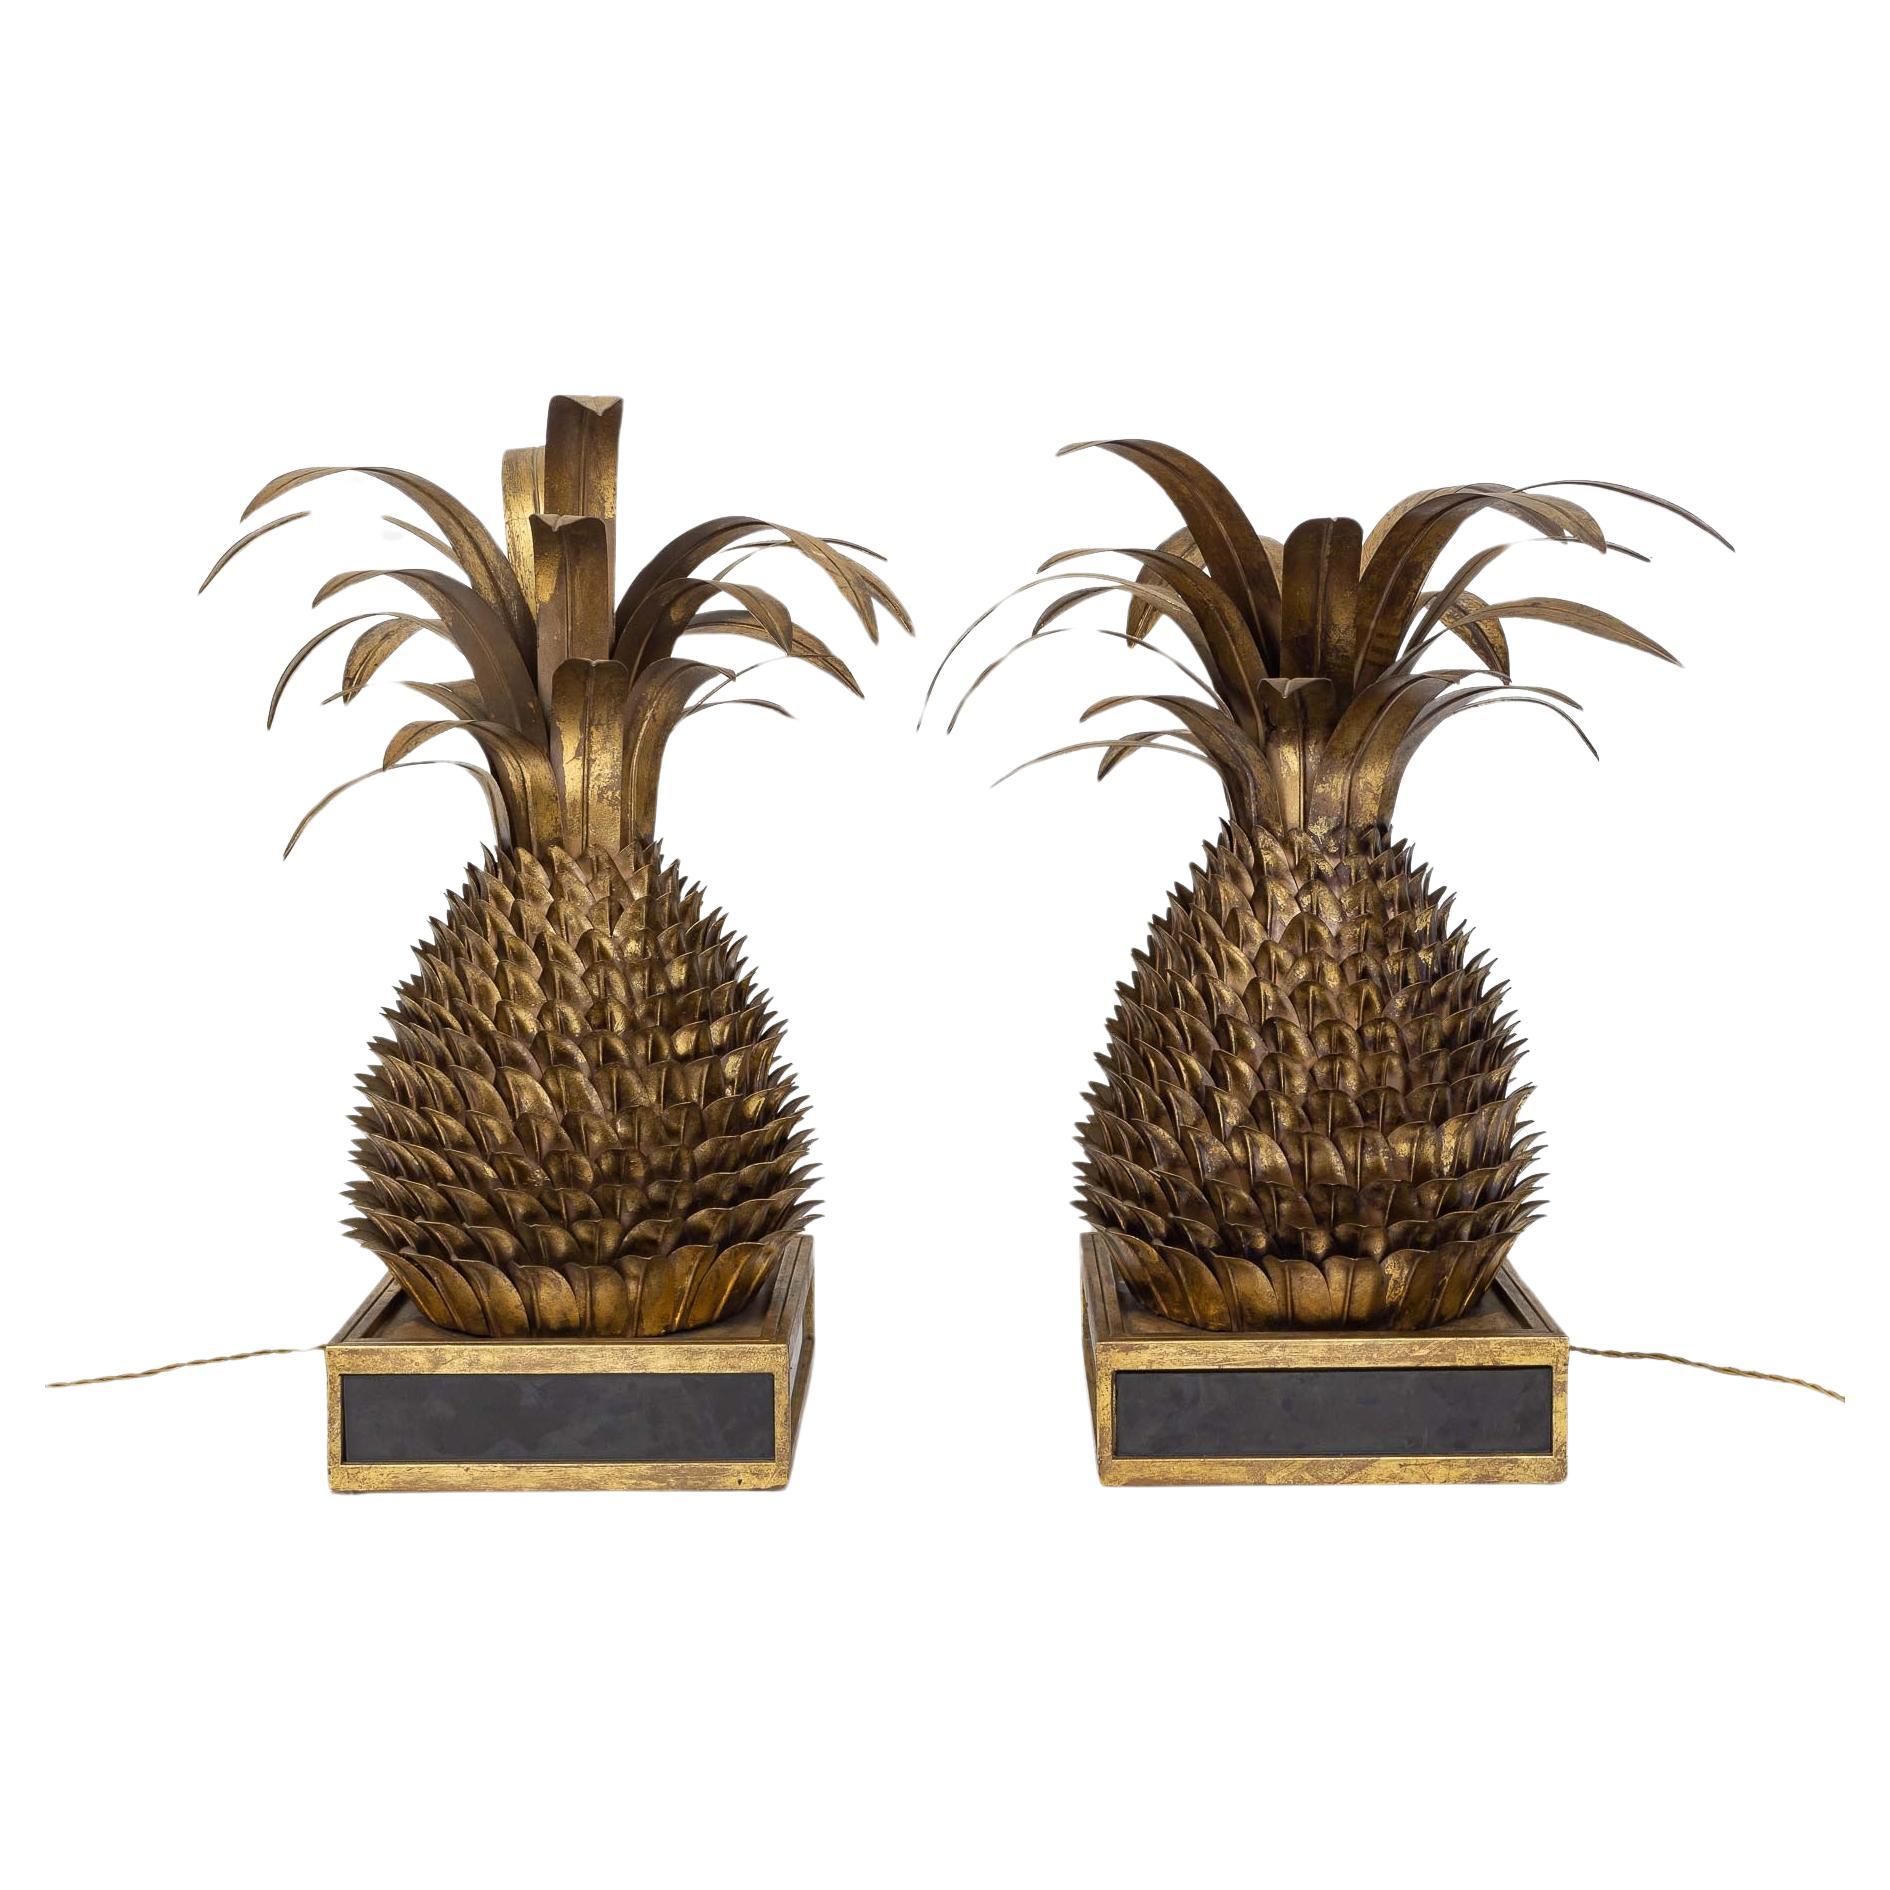 Hollywood Regency Impressive Pair of 'Ananas' Lamps , Attributed to Maison Jansen, France, ca 1970